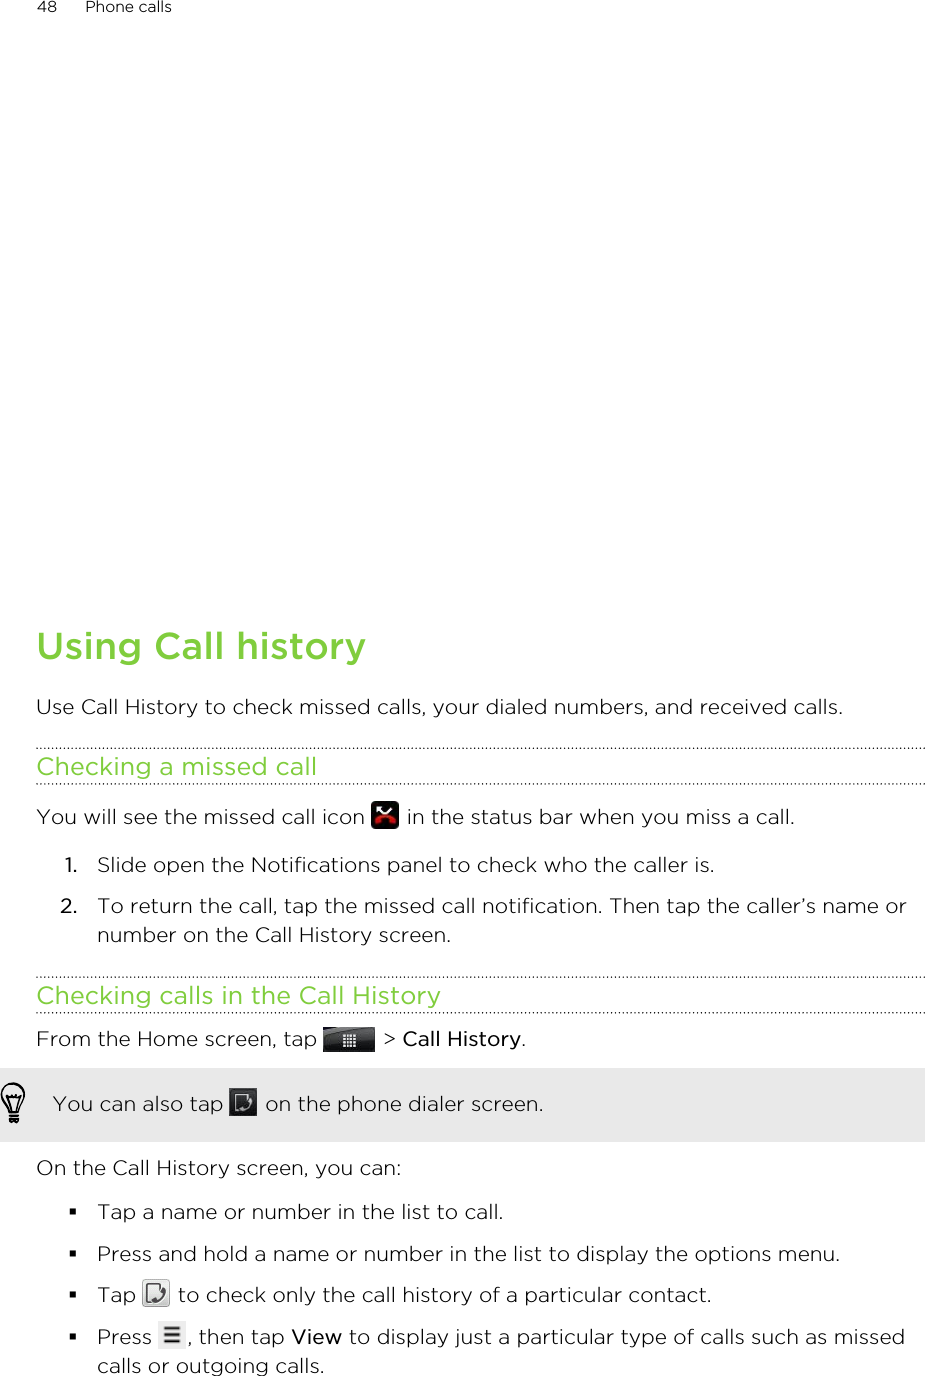 Using Call historyUse Call History to check missed calls, your dialed numbers, and received calls.Checking a missed callYou will see the missed call icon   in the status bar when you miss a call.1. Slide open the Notifications panel to check who the caller is.2. To return the call, tap the missed call notification. Then tap the caller’s name ornumber on the Call History screen.Checking calls in the Call HistoryFrom the Home screen, tap   &gt; Call History. You can also tap   on the phone dialer screen.On the Call History screen, you can:§Tap a name or number in the list to call.§Press and hold a name or number in the list to display the options menu.§Tap   to check only the call history of a particular contact.§Press  , then tap View to display just a particular type of calls such as missedcalls or outgoing calls.48 Phone calls